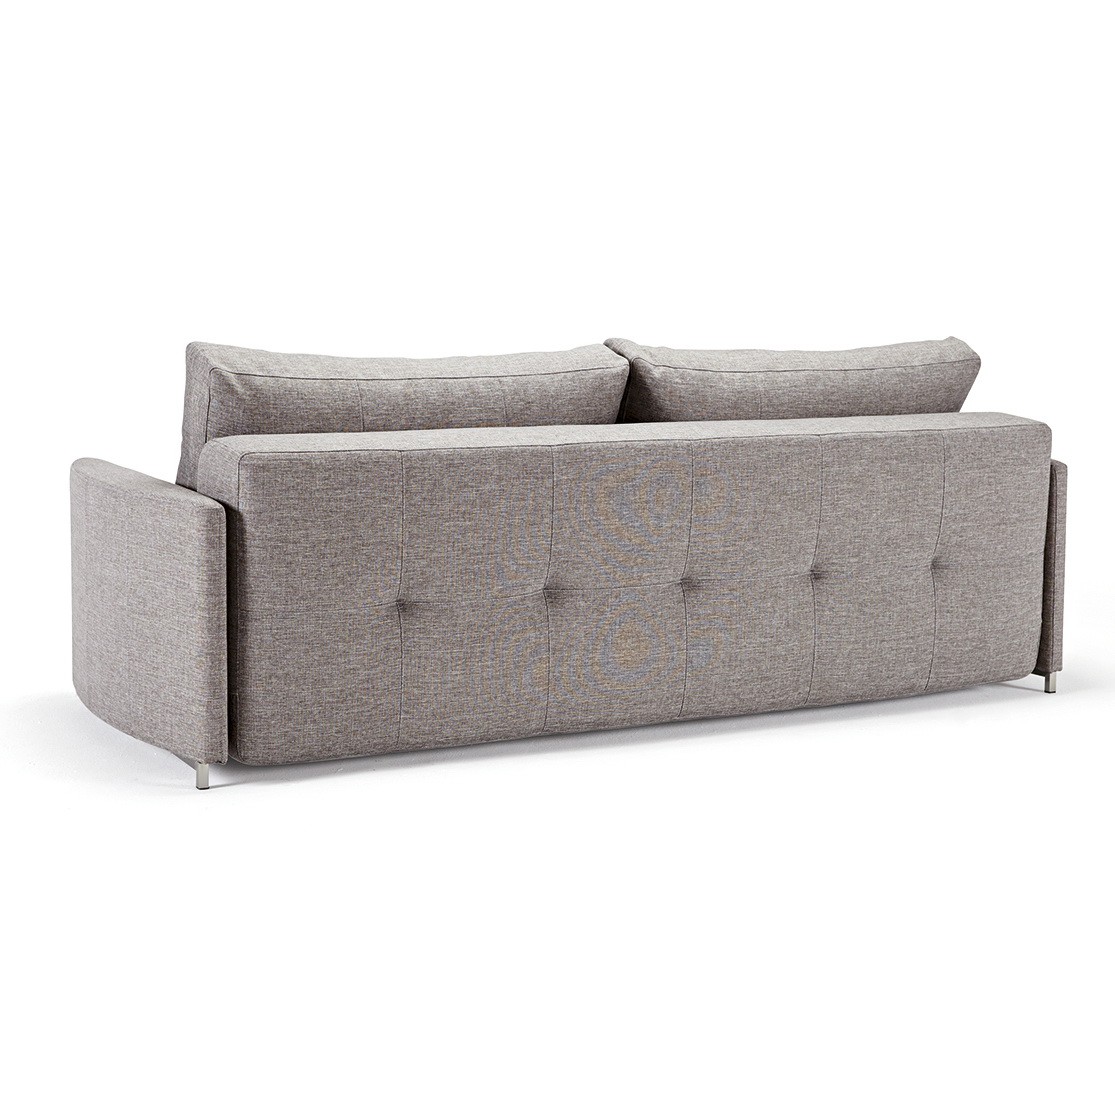 Crescent Deluxe Excess Sofa Innovation